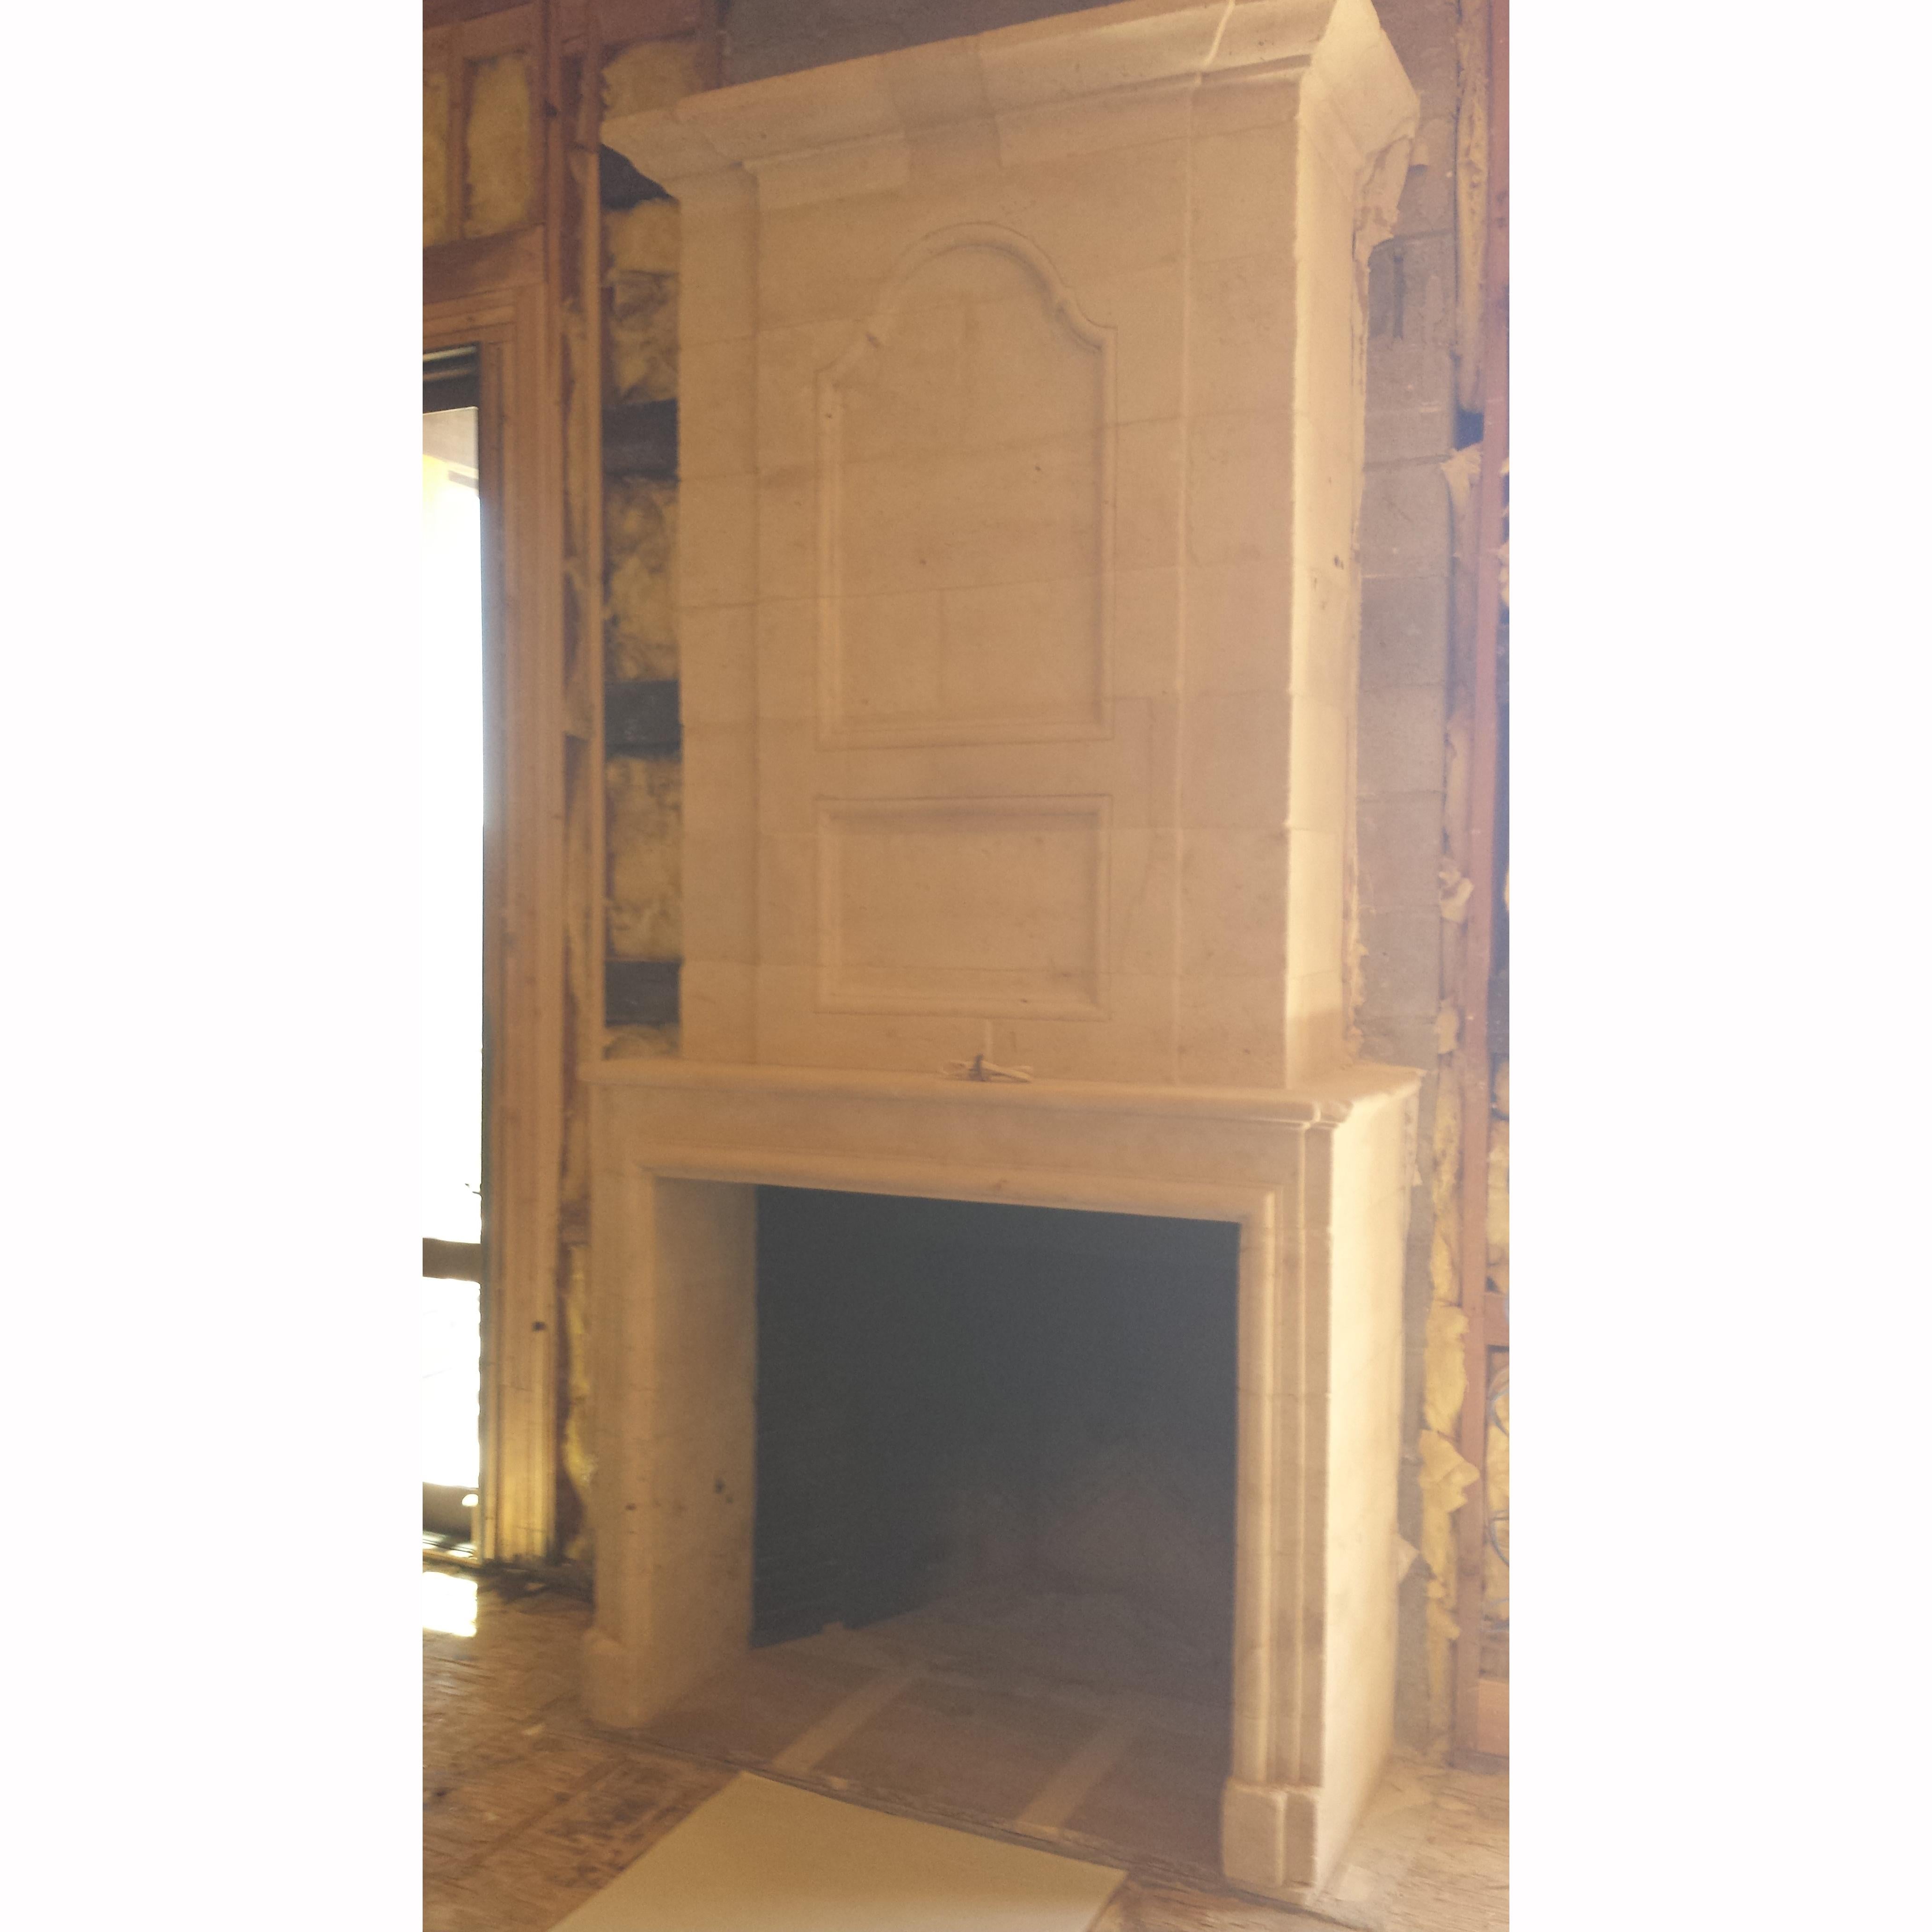 Rectilinear antique limestone fireplace and cheminee with rectilinear firebox. 